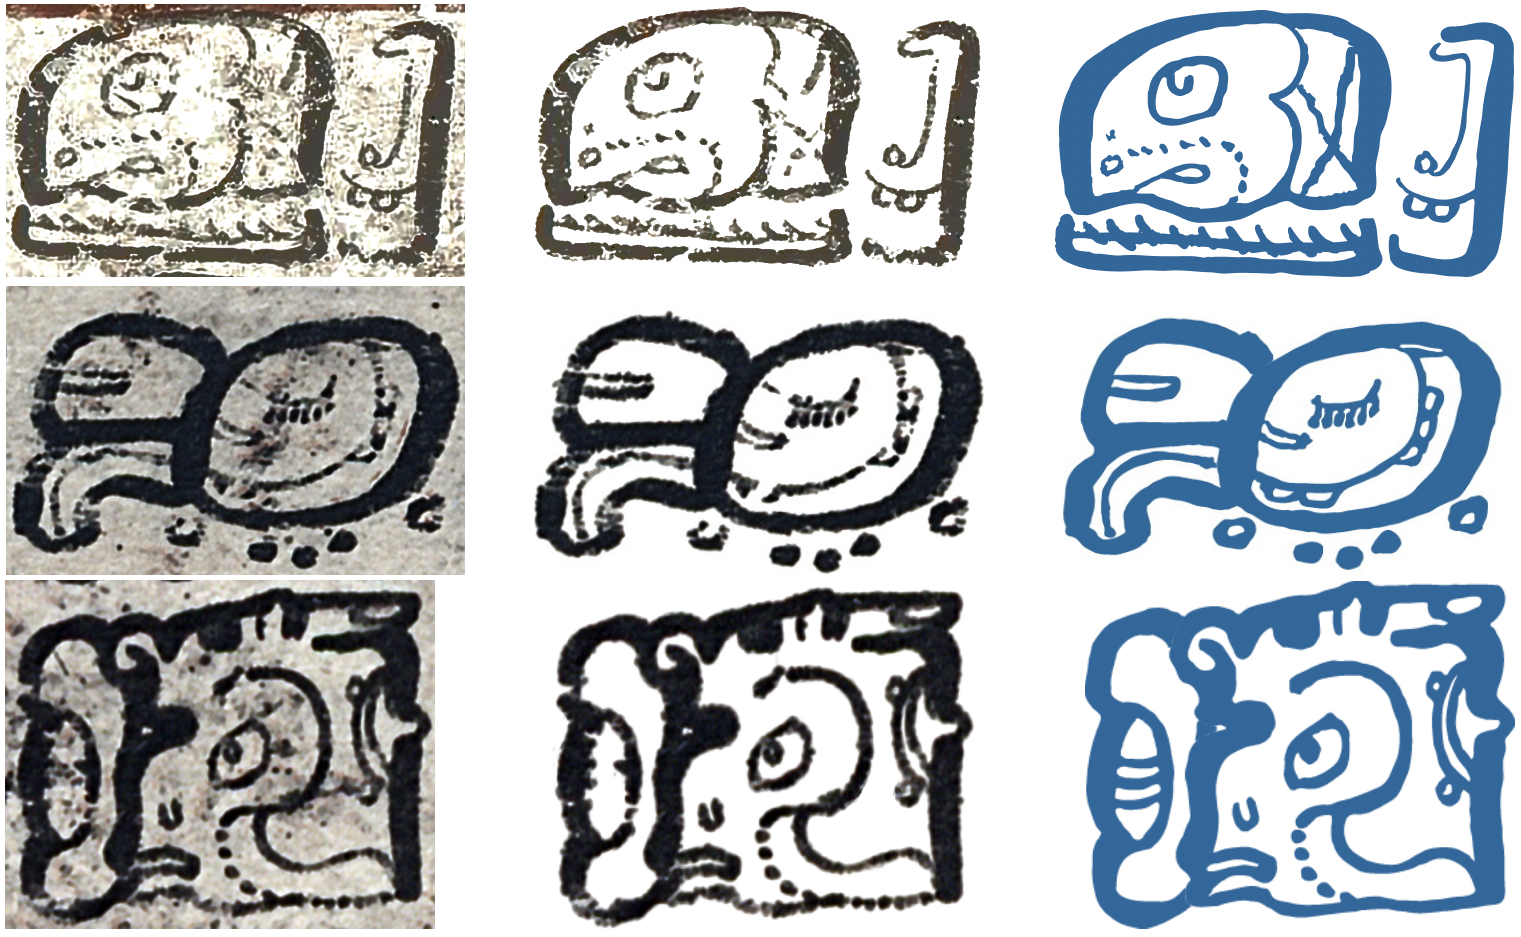 Figure 3. Digitization quality: (left) raw glyph blocks cropped from Dresden codex; (middle) clean raster images produced by removing the background noise; (right) reconstructed high-quality vectorial images.